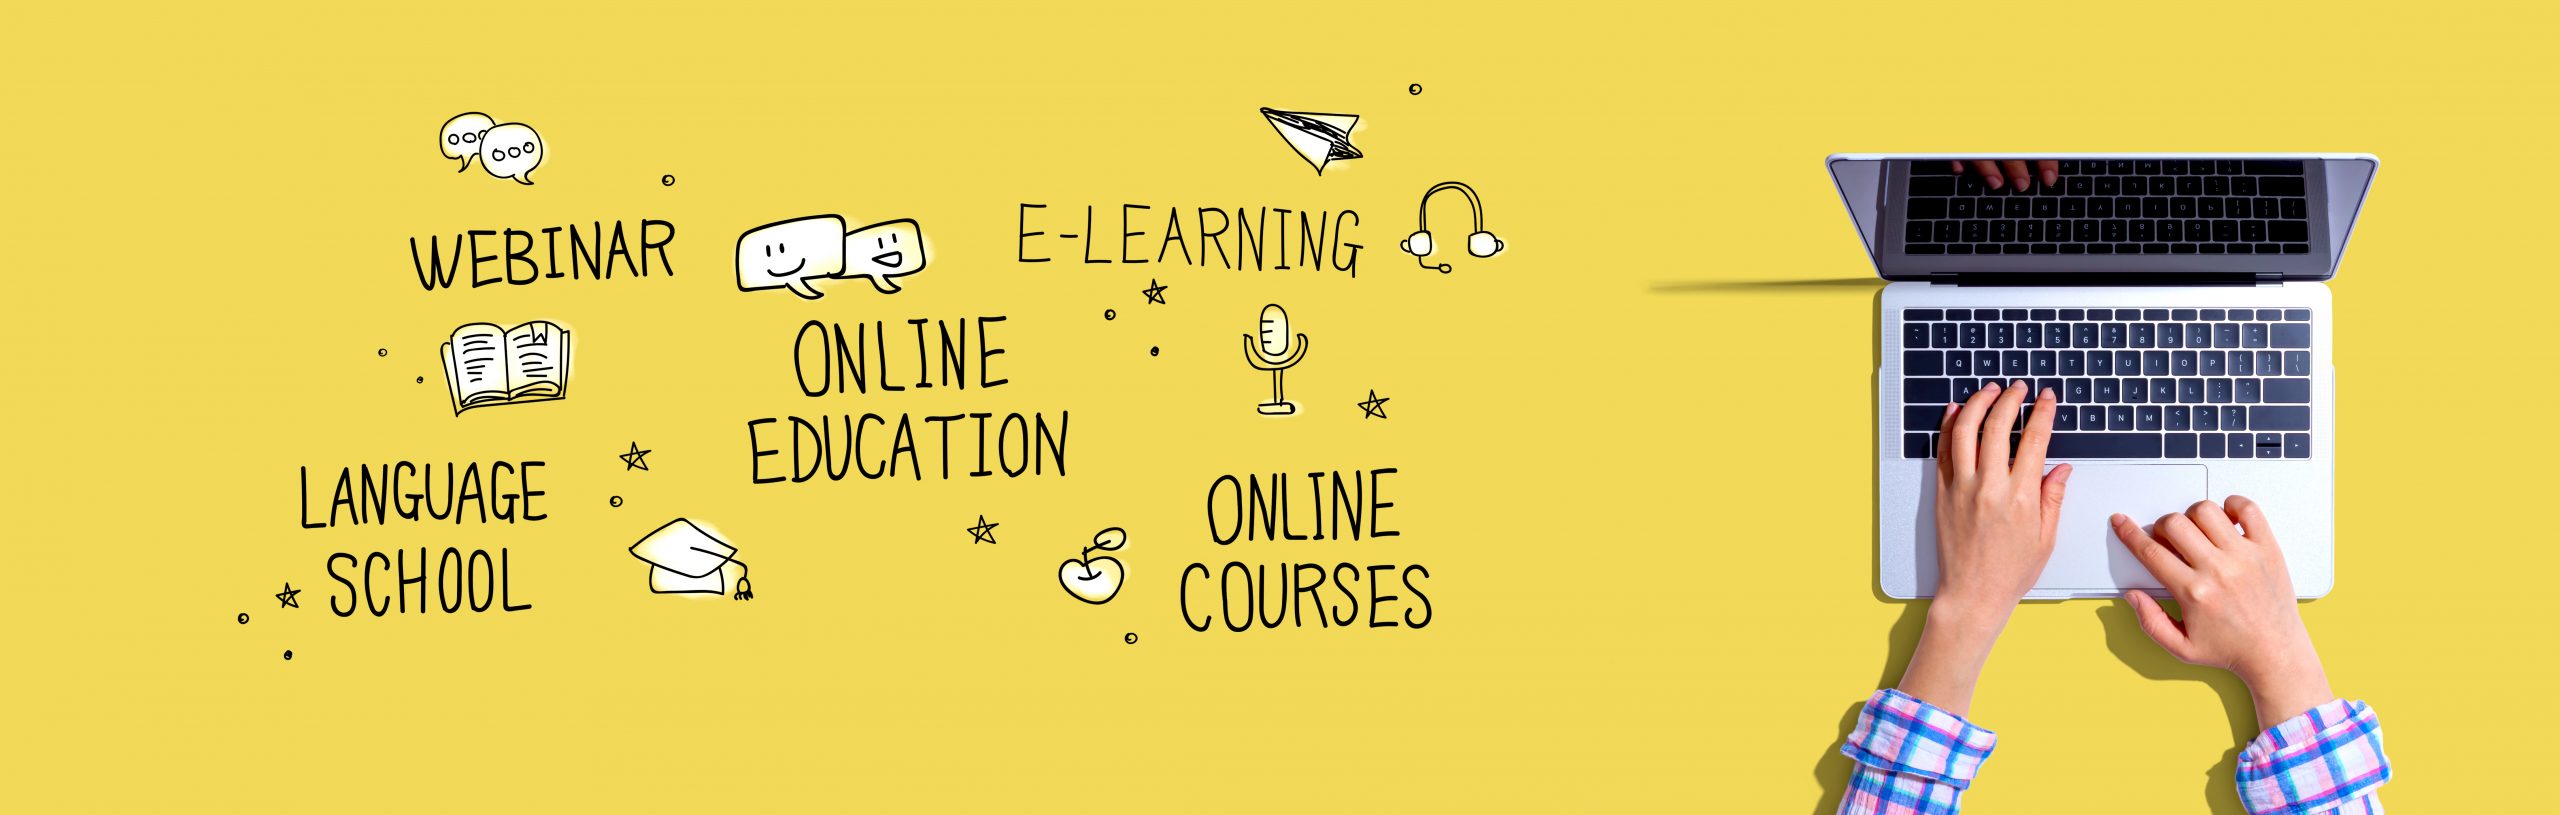 Online education theme with woman using a laptop computer